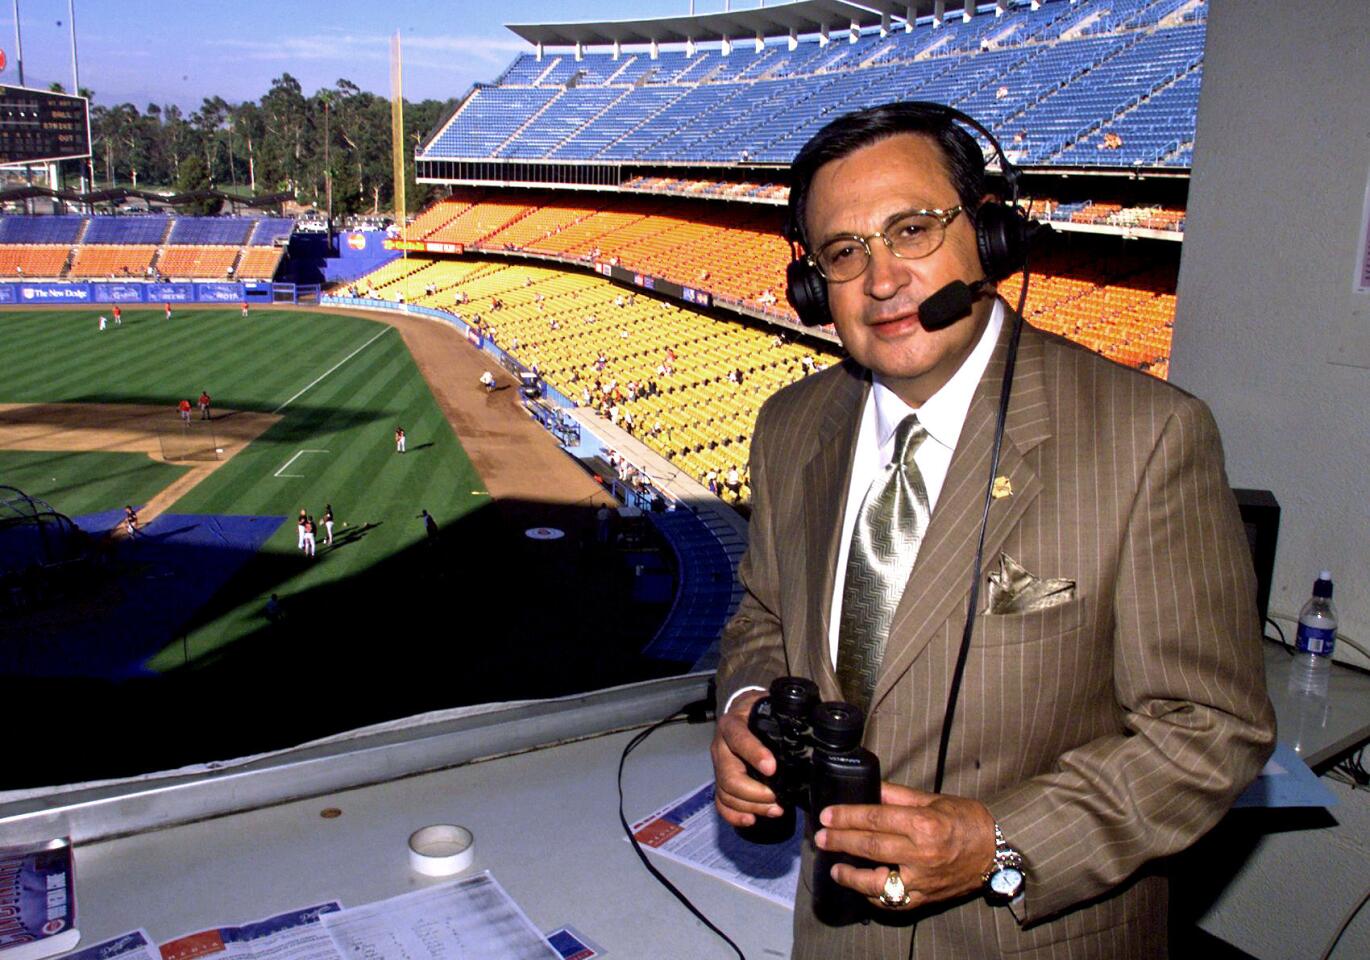 Los Angeles Dodger radio and TV broadcaster Jaime Jarrin, now 77, started working for the franchise when he was 19.